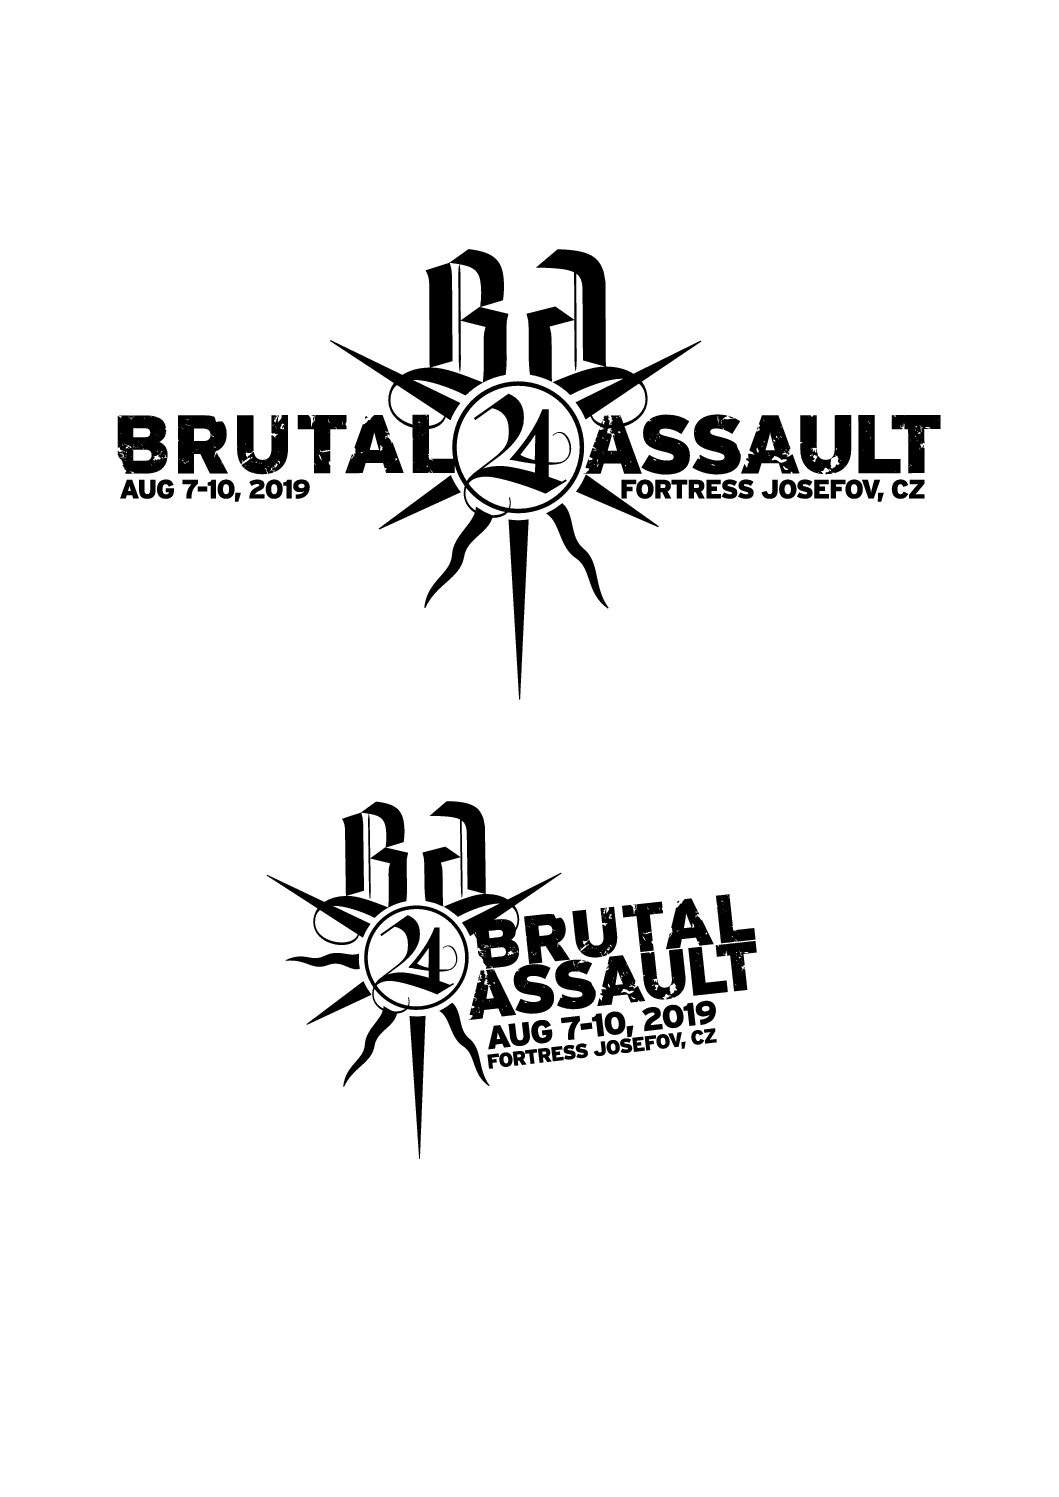 Brutal Assault presented one of the strongest line-ups of all times